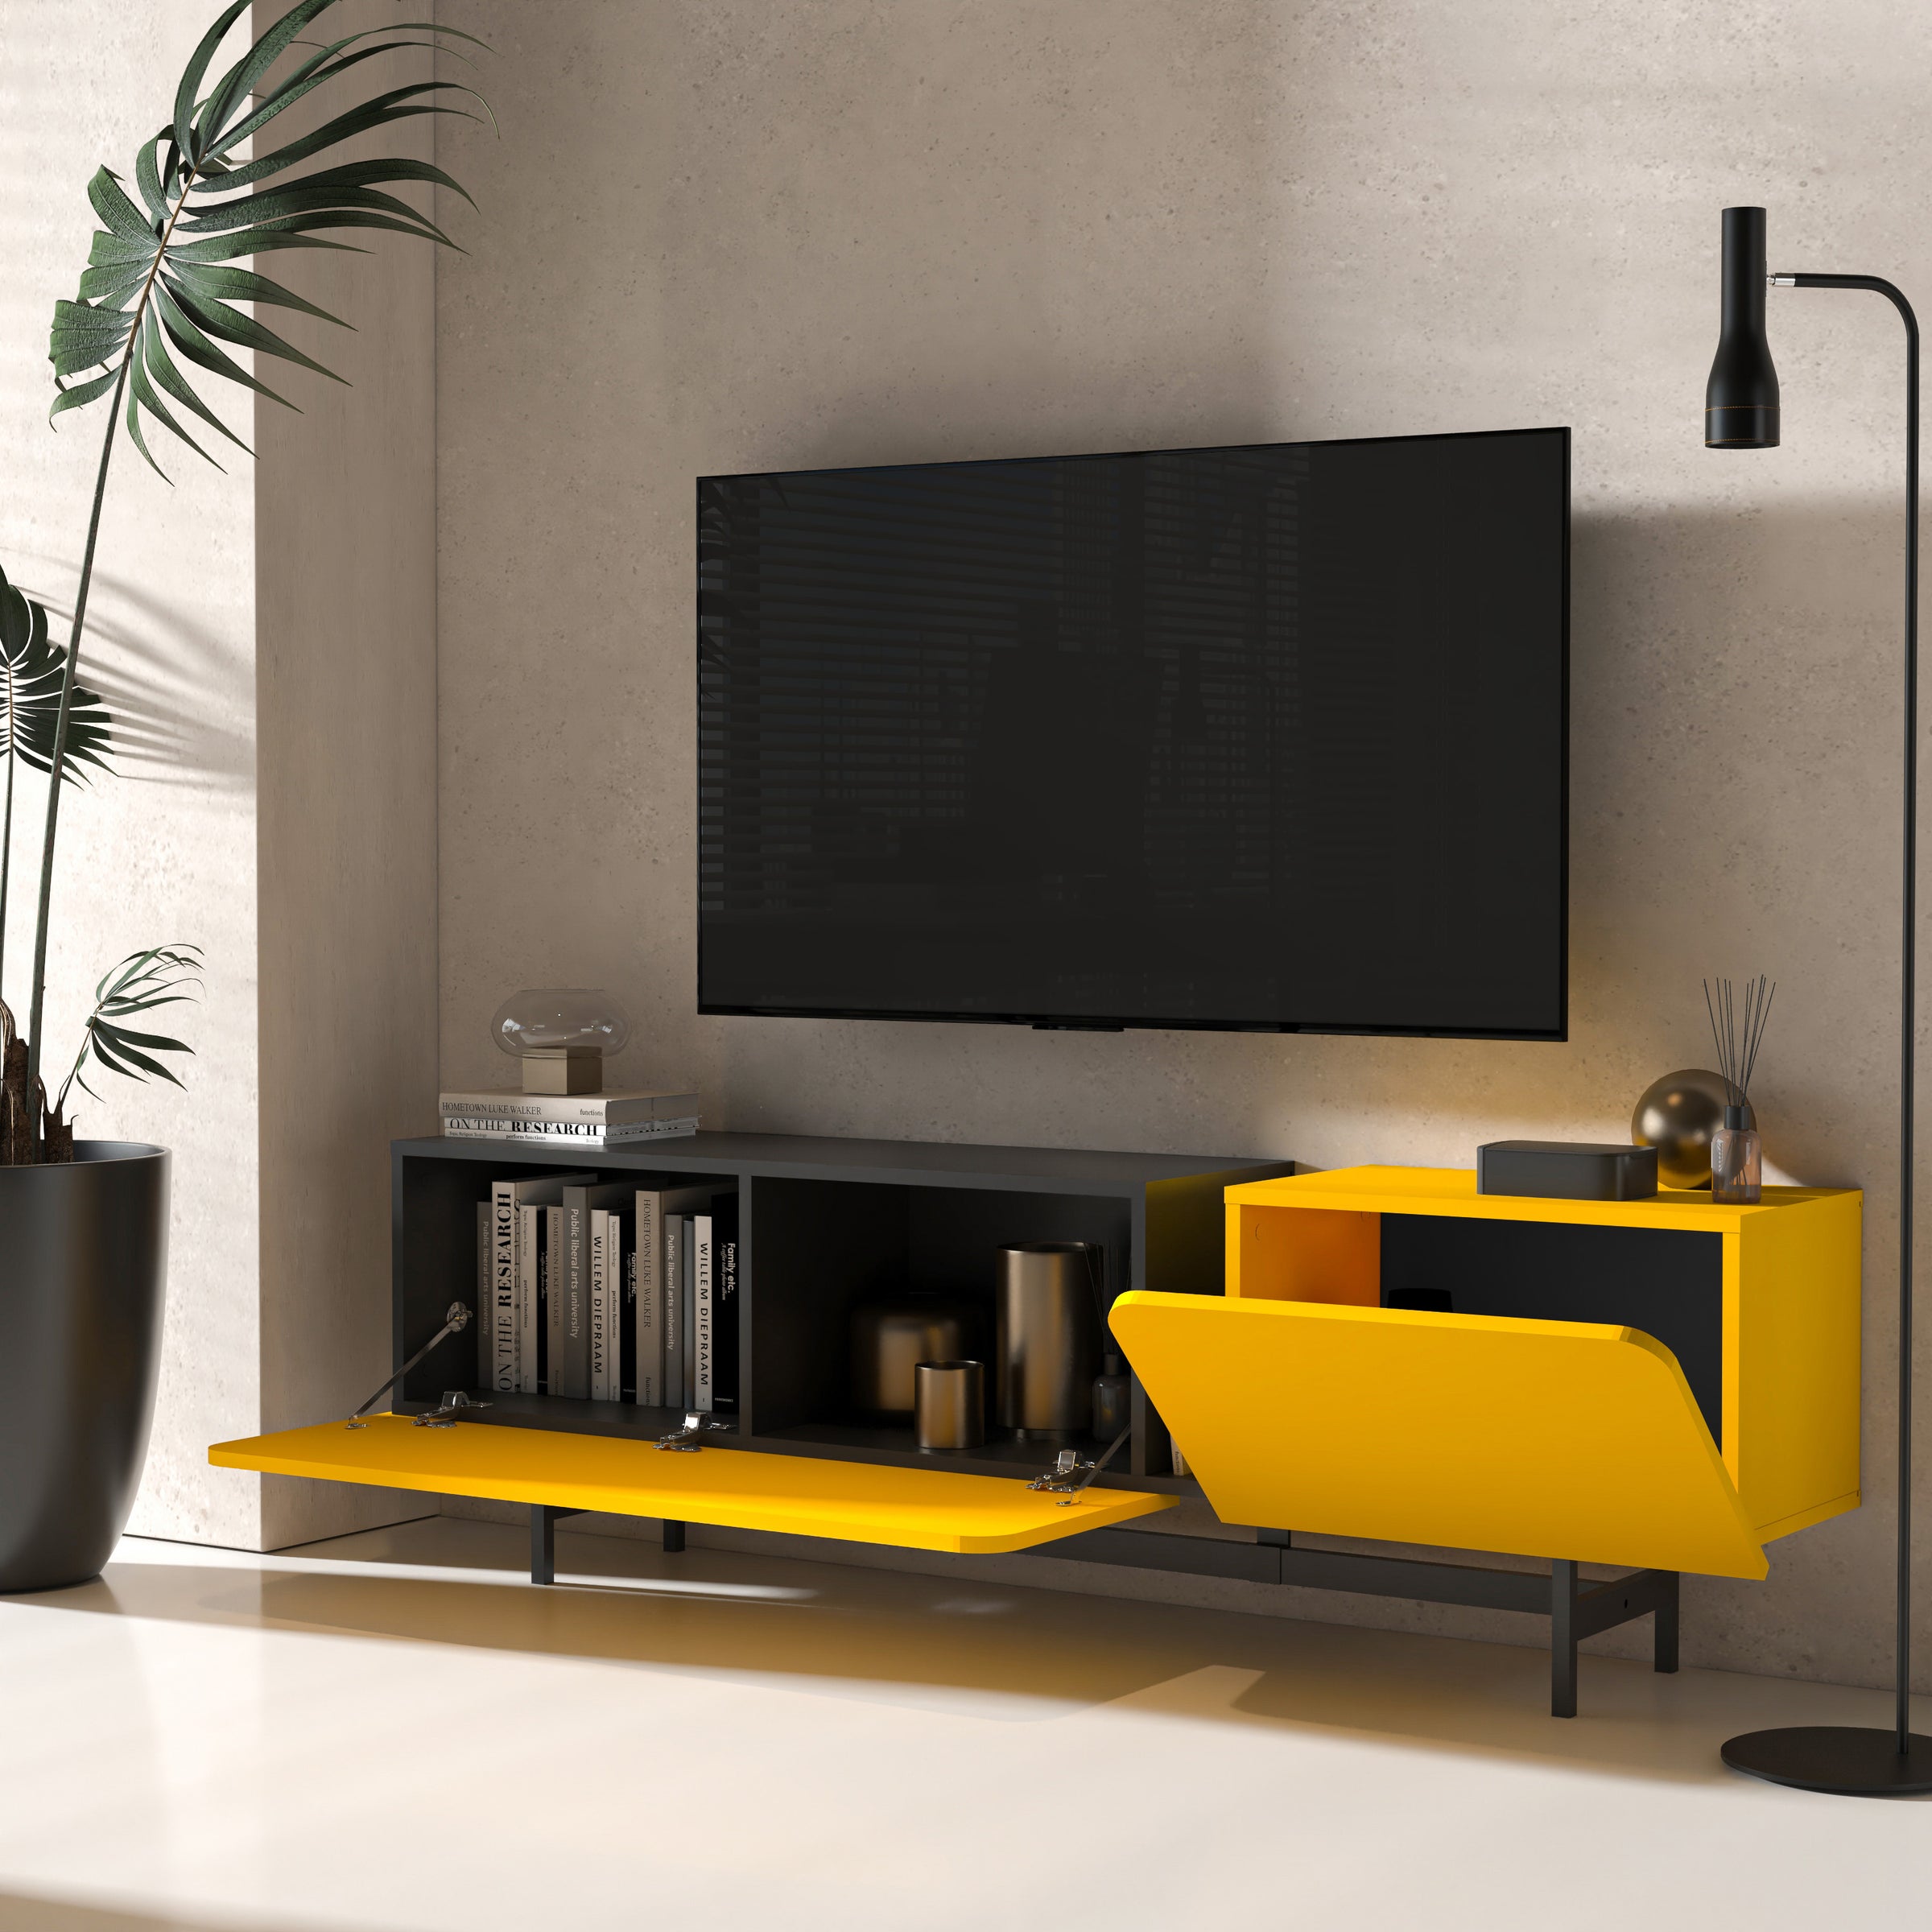 Unique Yellow Finish Detail on Modern TV Console